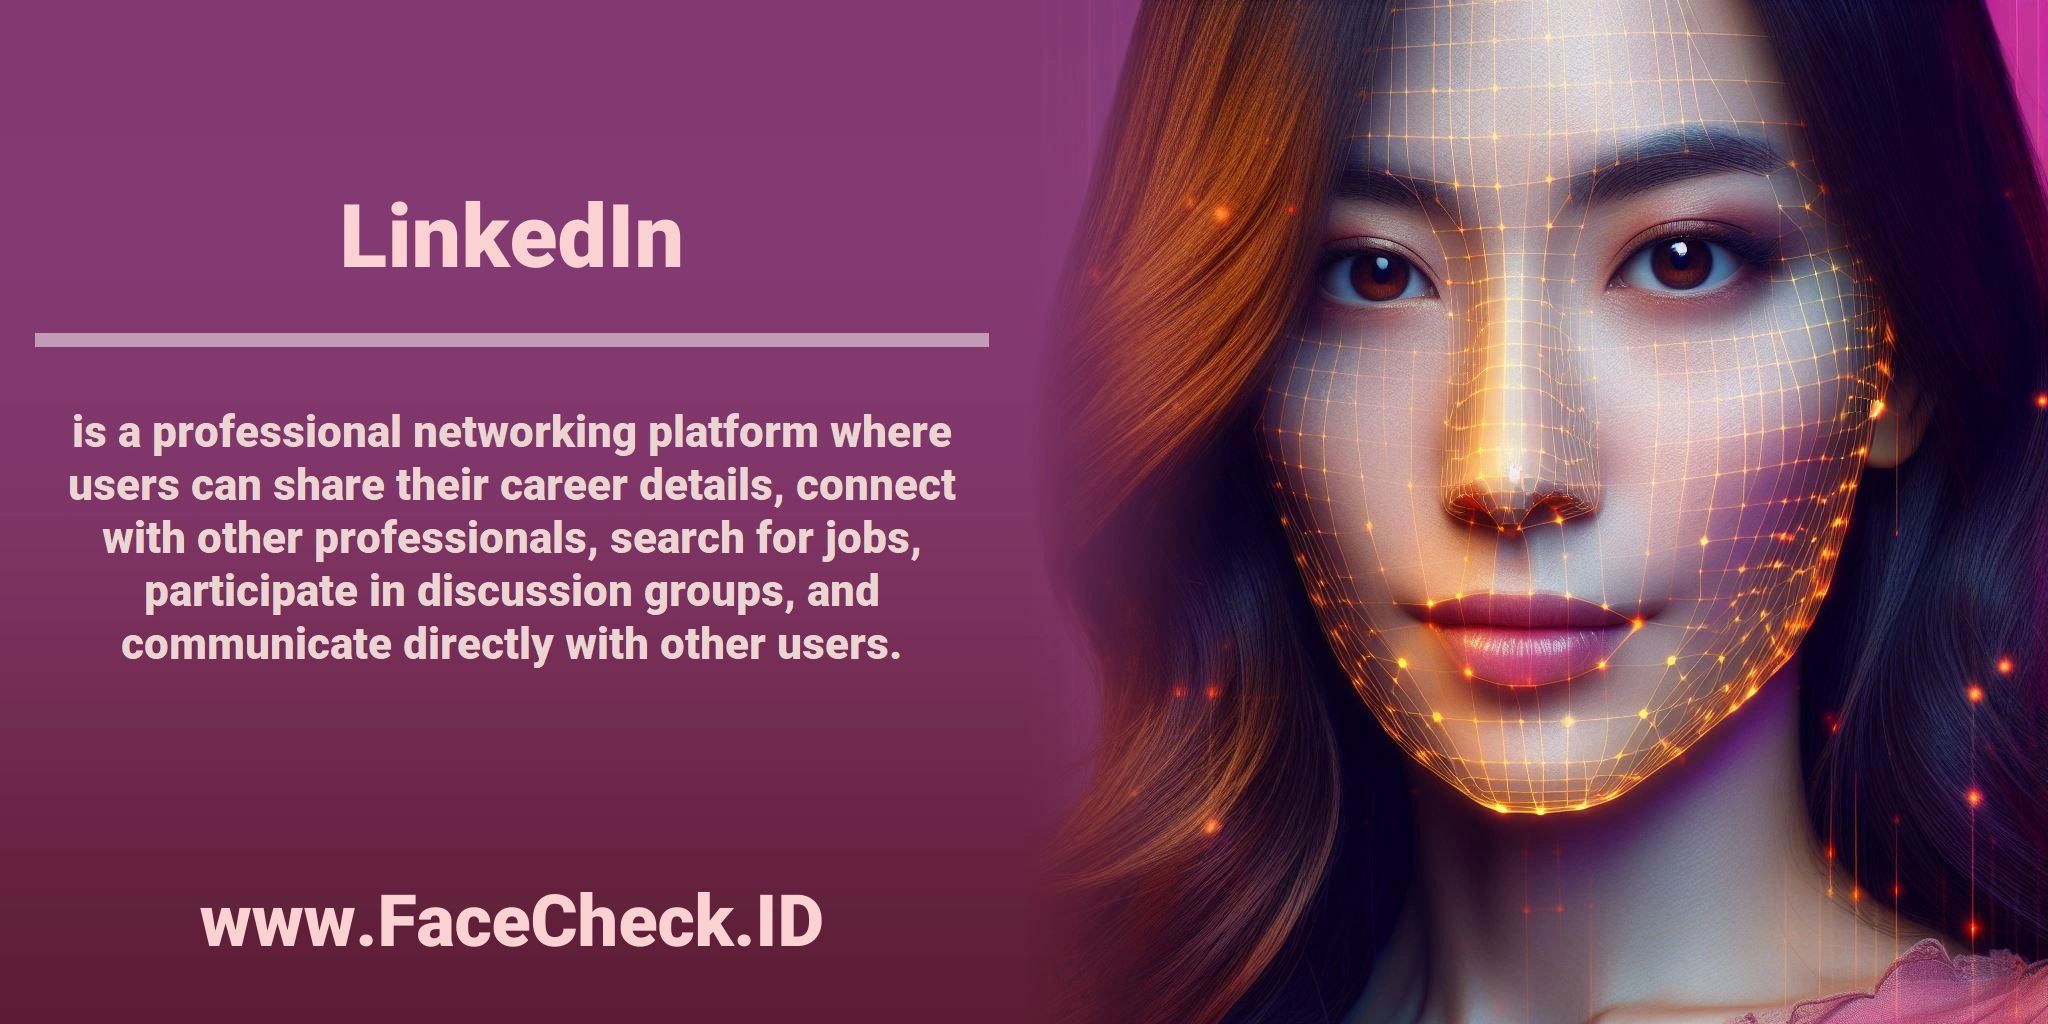 <b>LinkedIn</b> is a professional networking platform where users can share their career details, connect with other professionals, search for jobs, participate in discussion groups, and communicate directly with other users.